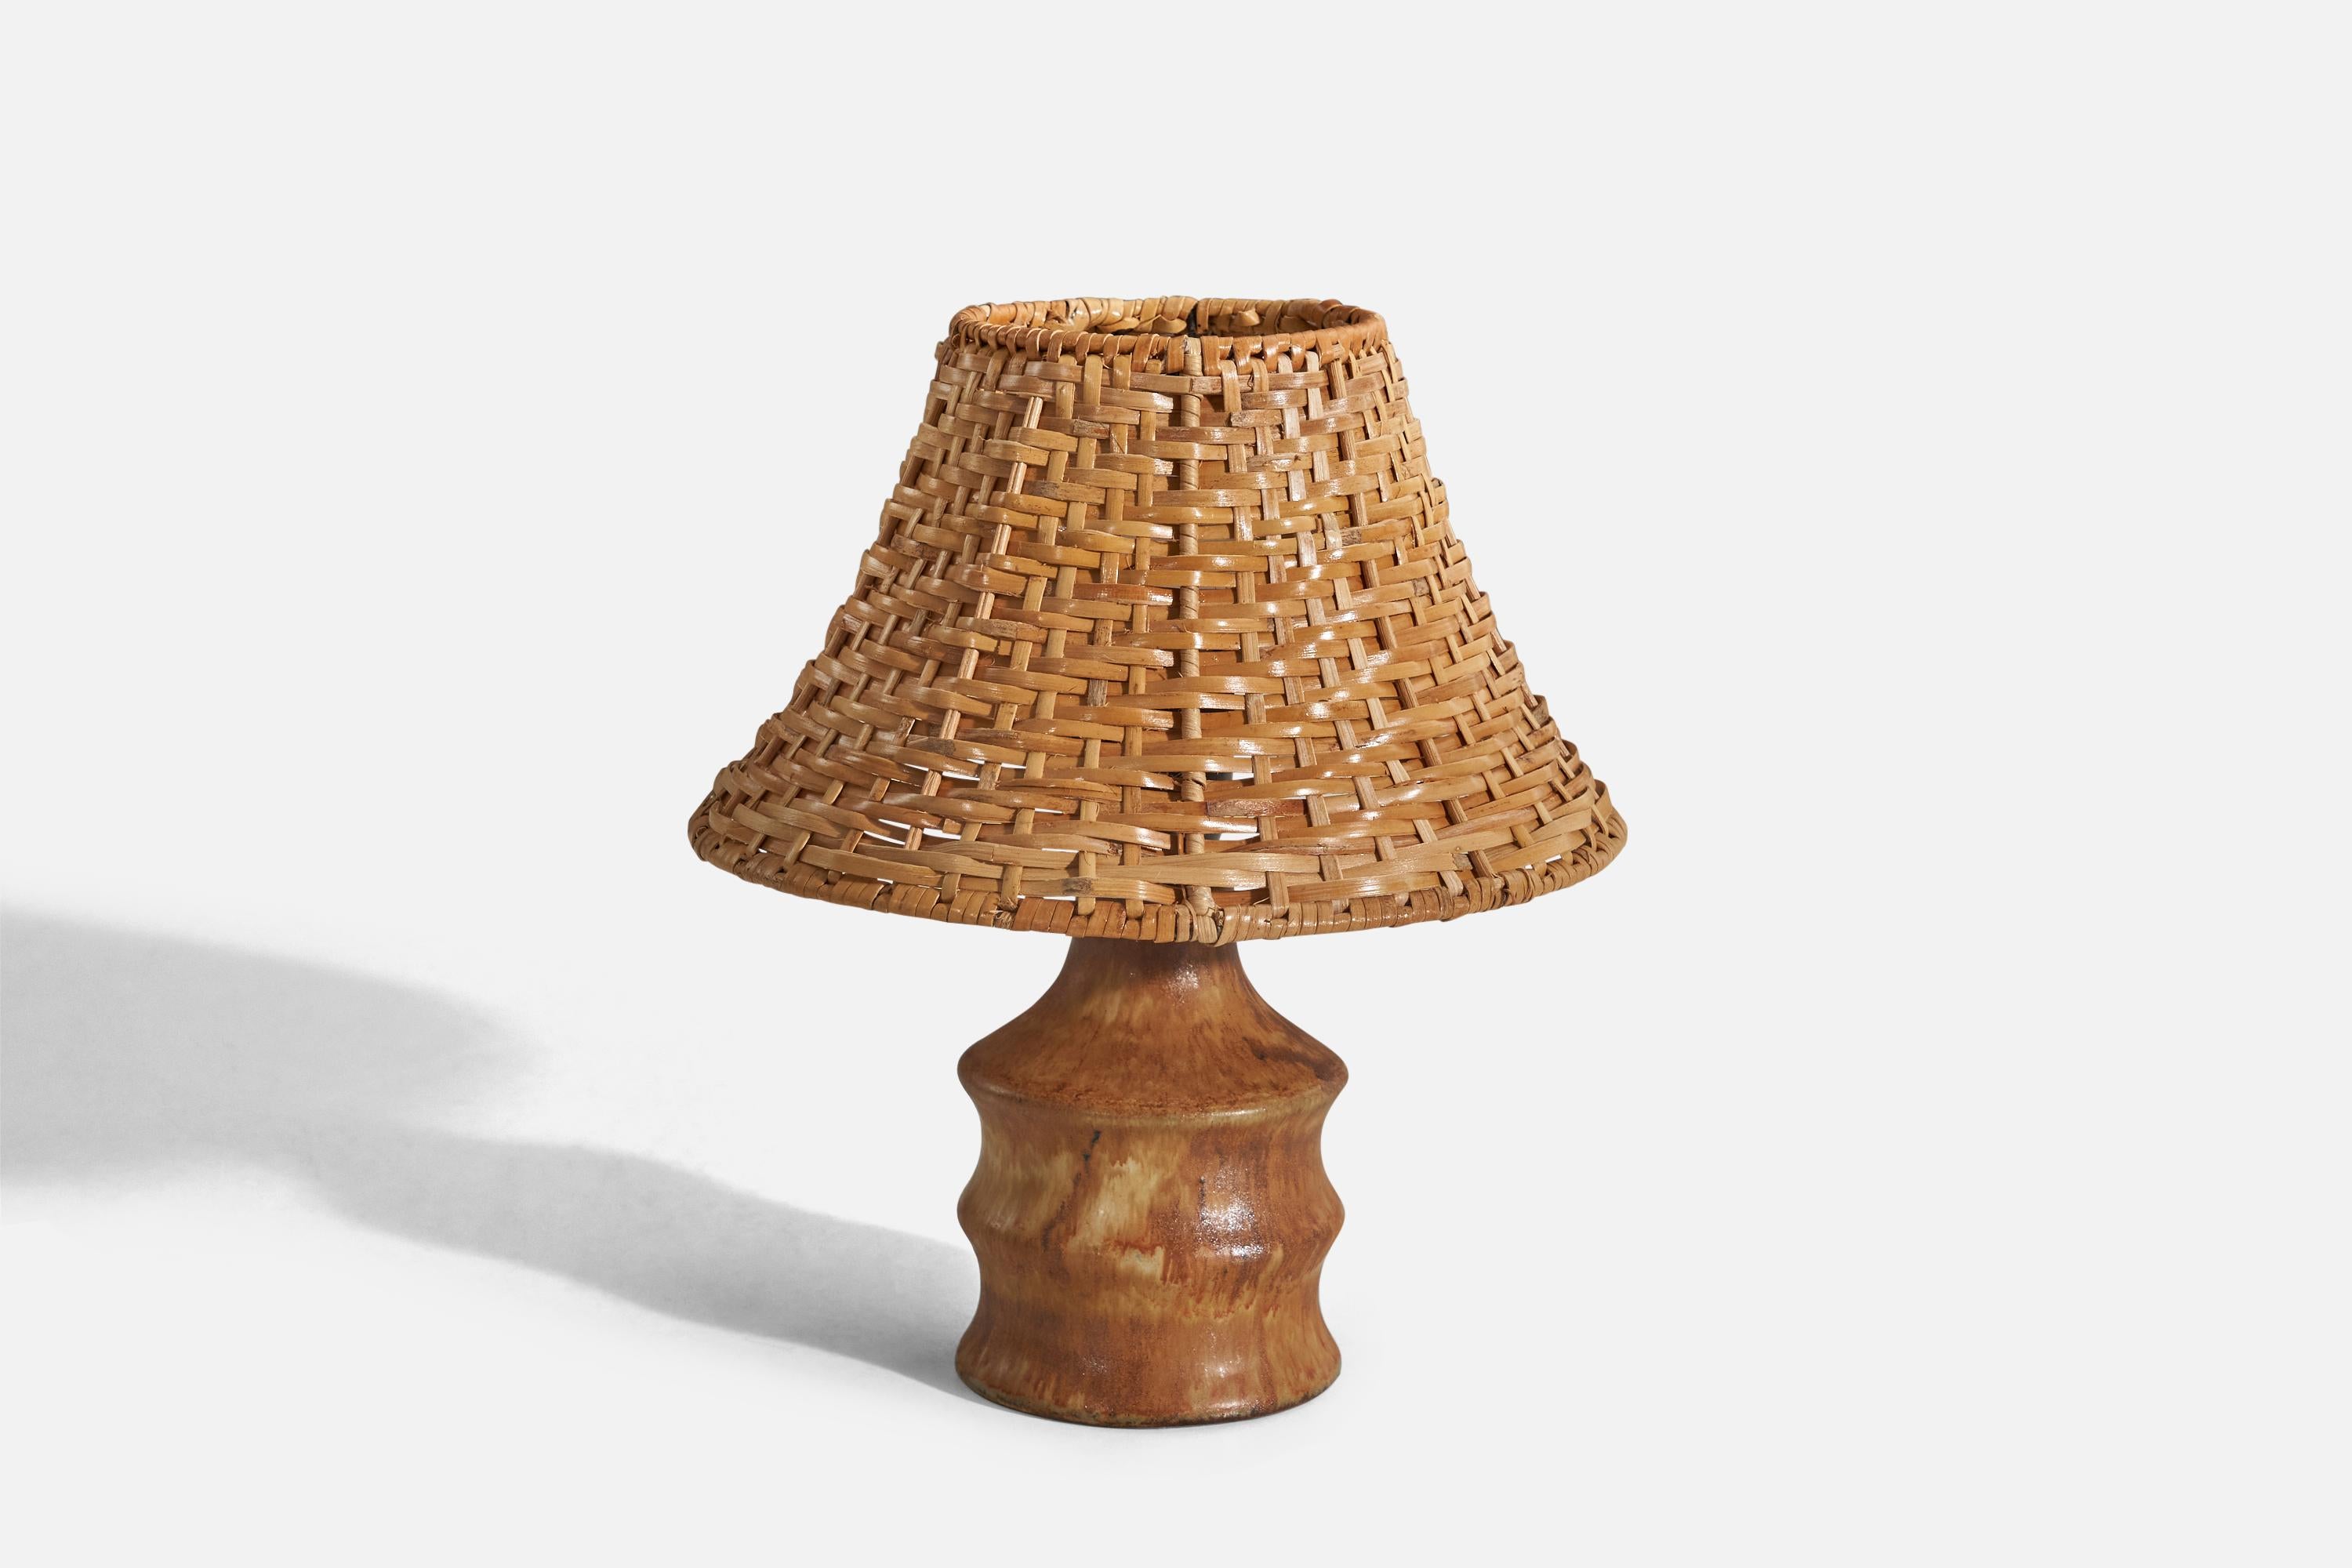 A brown-glazed stoneware table lamp designed by Bruno Karlsson and produced by Ego Stengods, Sweden, c. 1960s.

Sold with rattan lampshade. 
Dimensions of lamp (inches) : 6.93 x 3.7 x 3.7 (Height x Width x Depth)
Dimensions of shade (inches) :